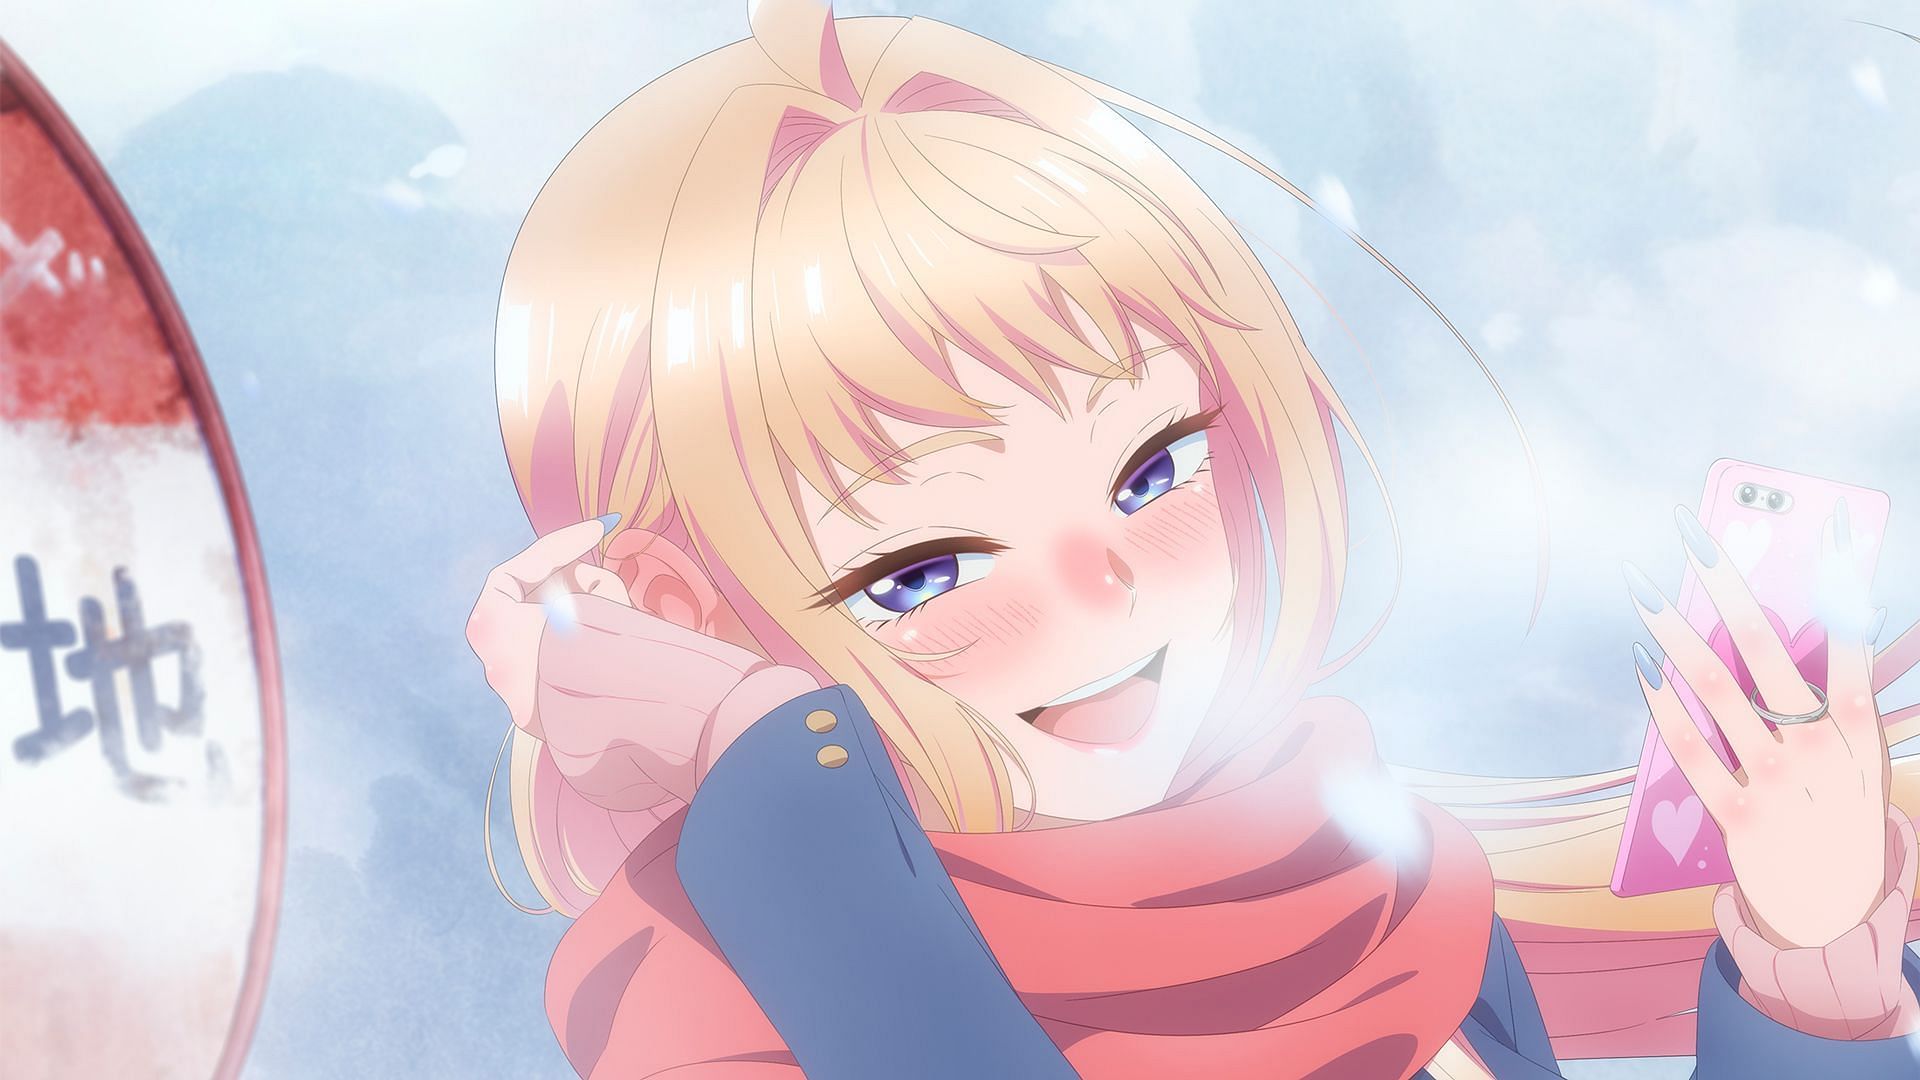 Hokkaido Gals Are Super Adorable! anime trailer reveals release window and more